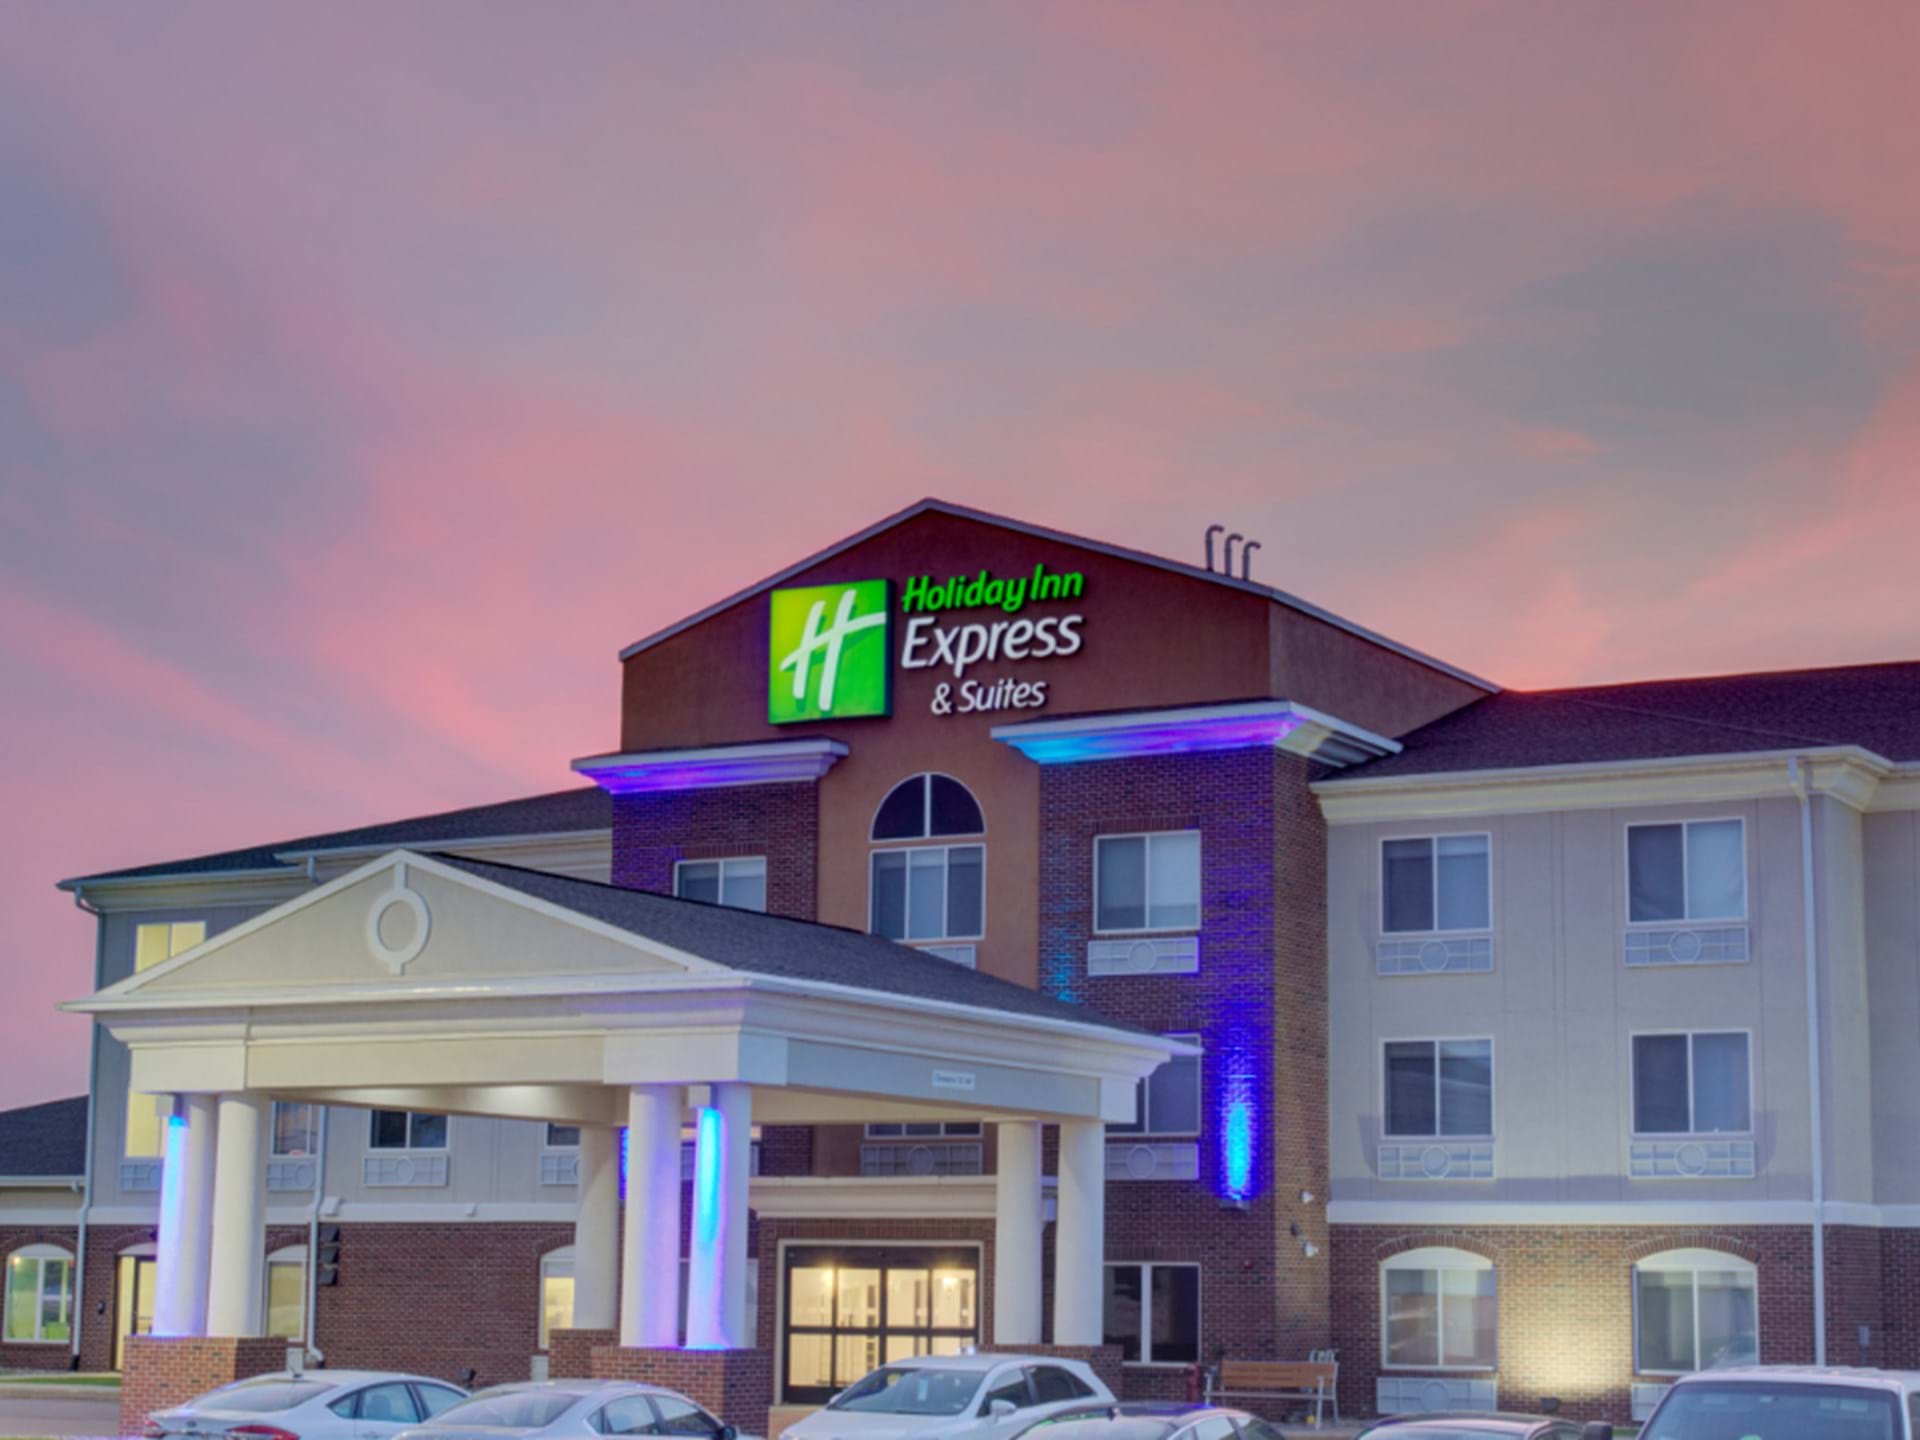 Welcome to the Holiday Inn Express!